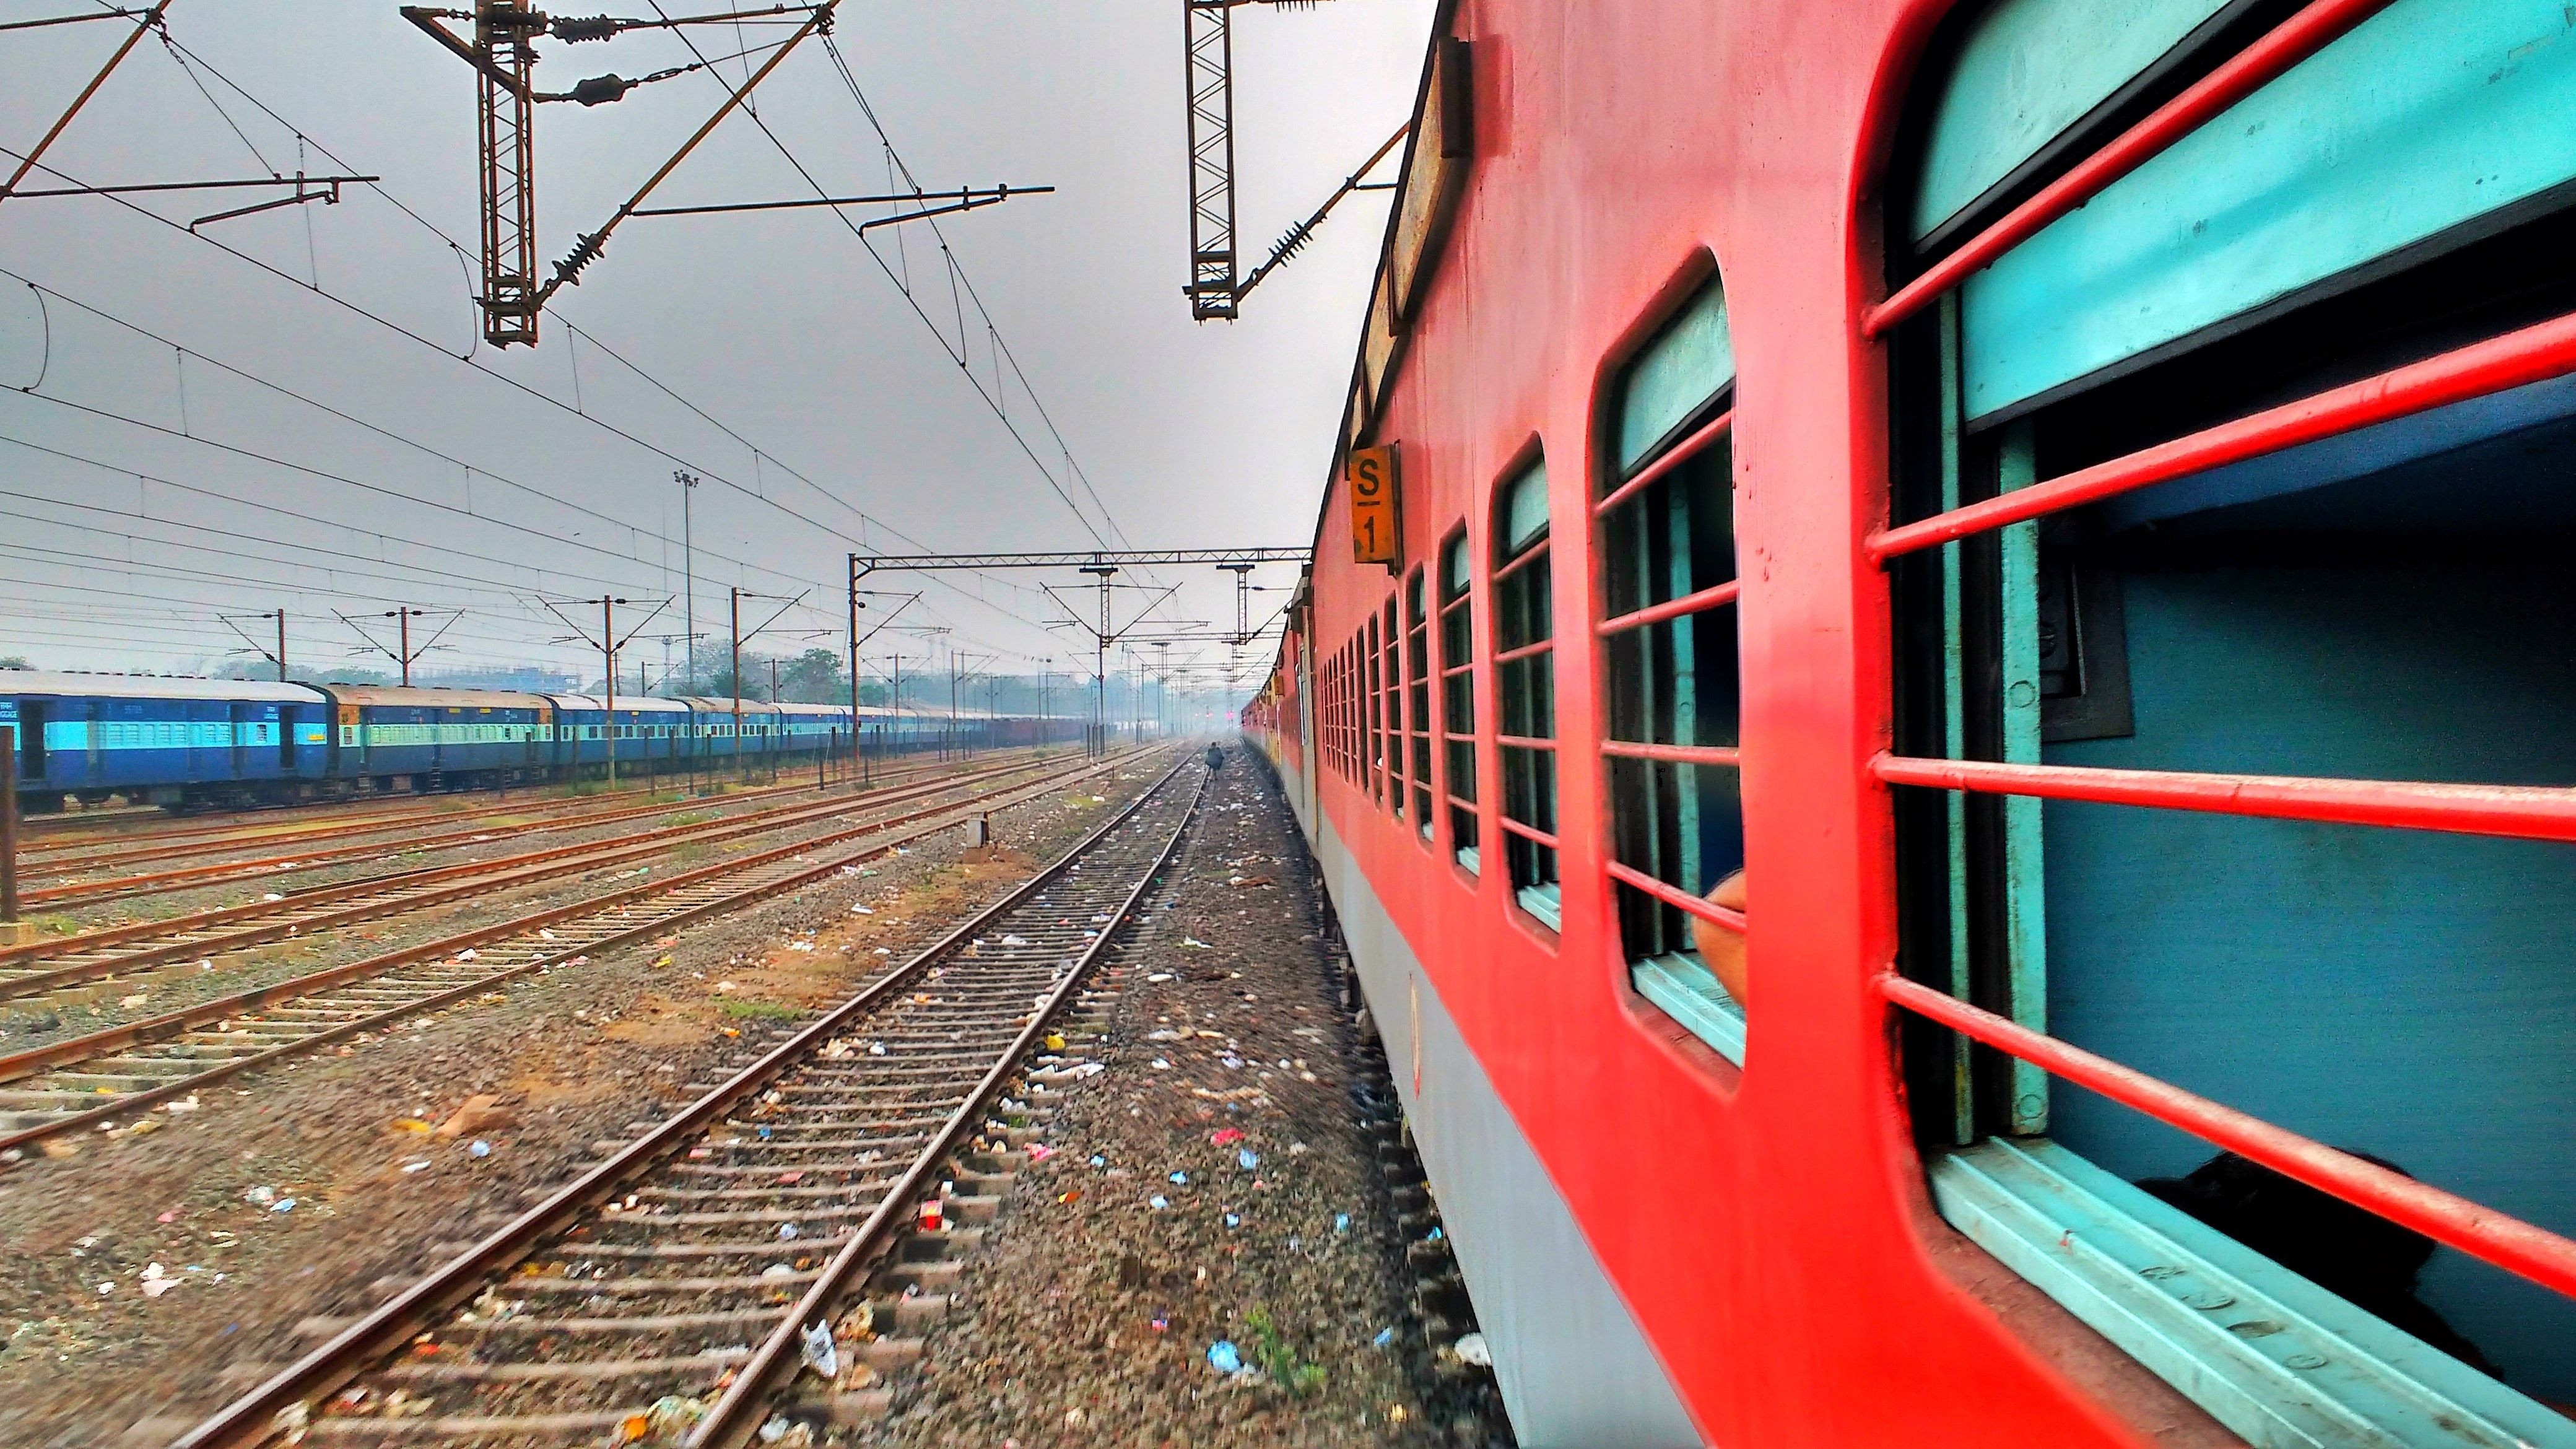 Free of #perspective #railway #indian#train #red